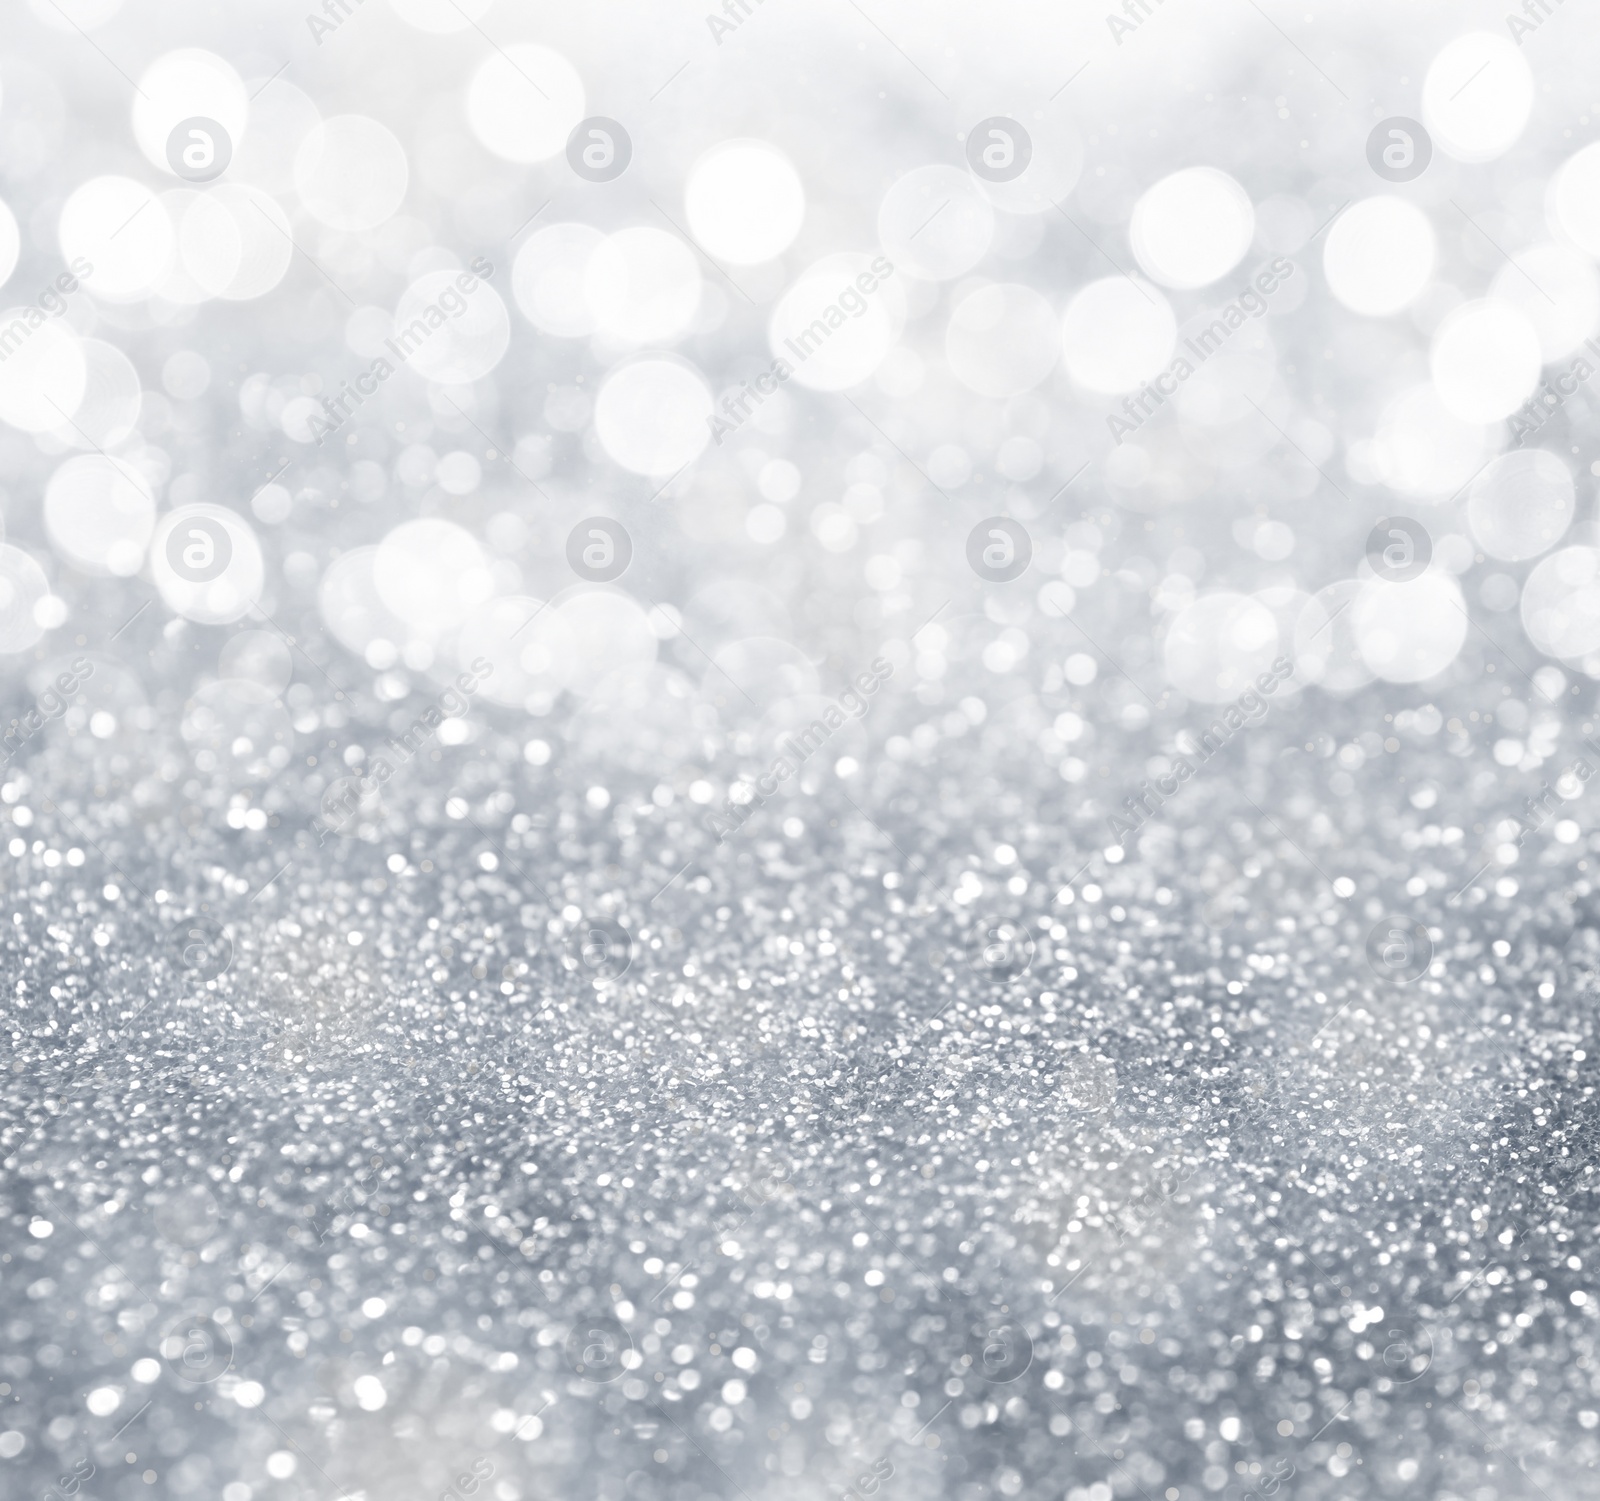 Image of Shiny silver glitter as background. Bokeh effect